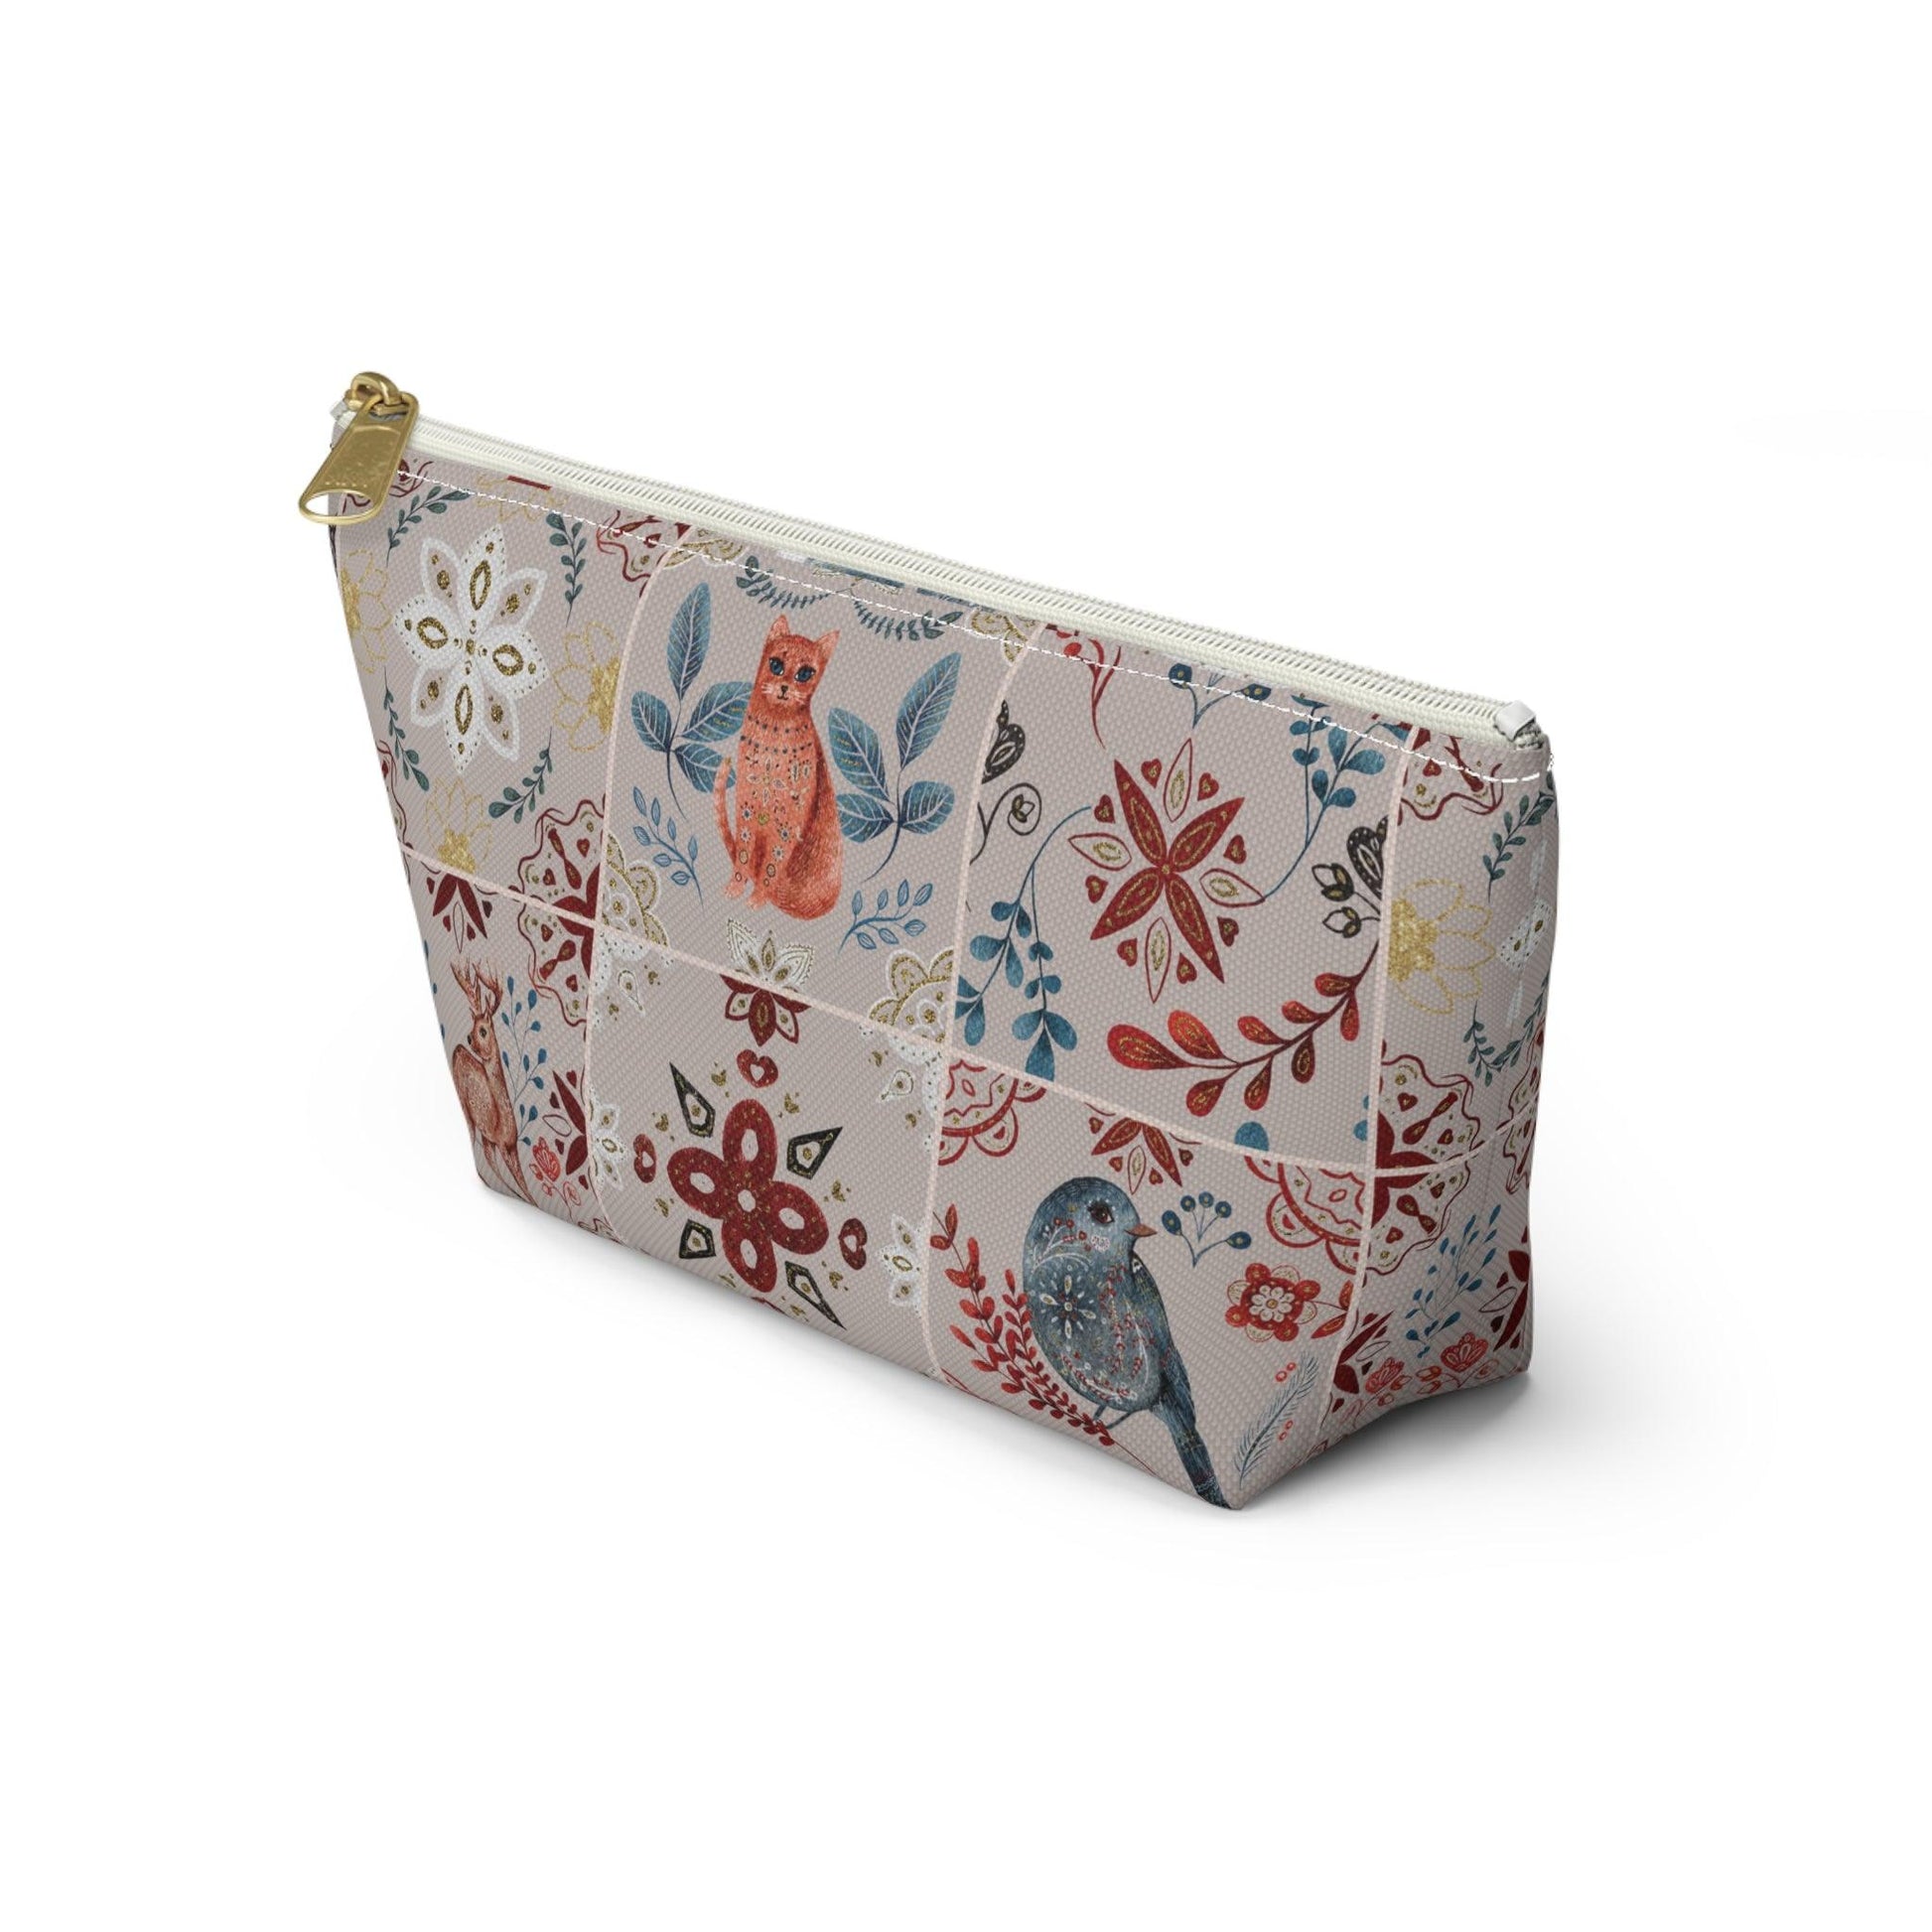 Nordic Tiles Print Pouch - The Global Wanderer